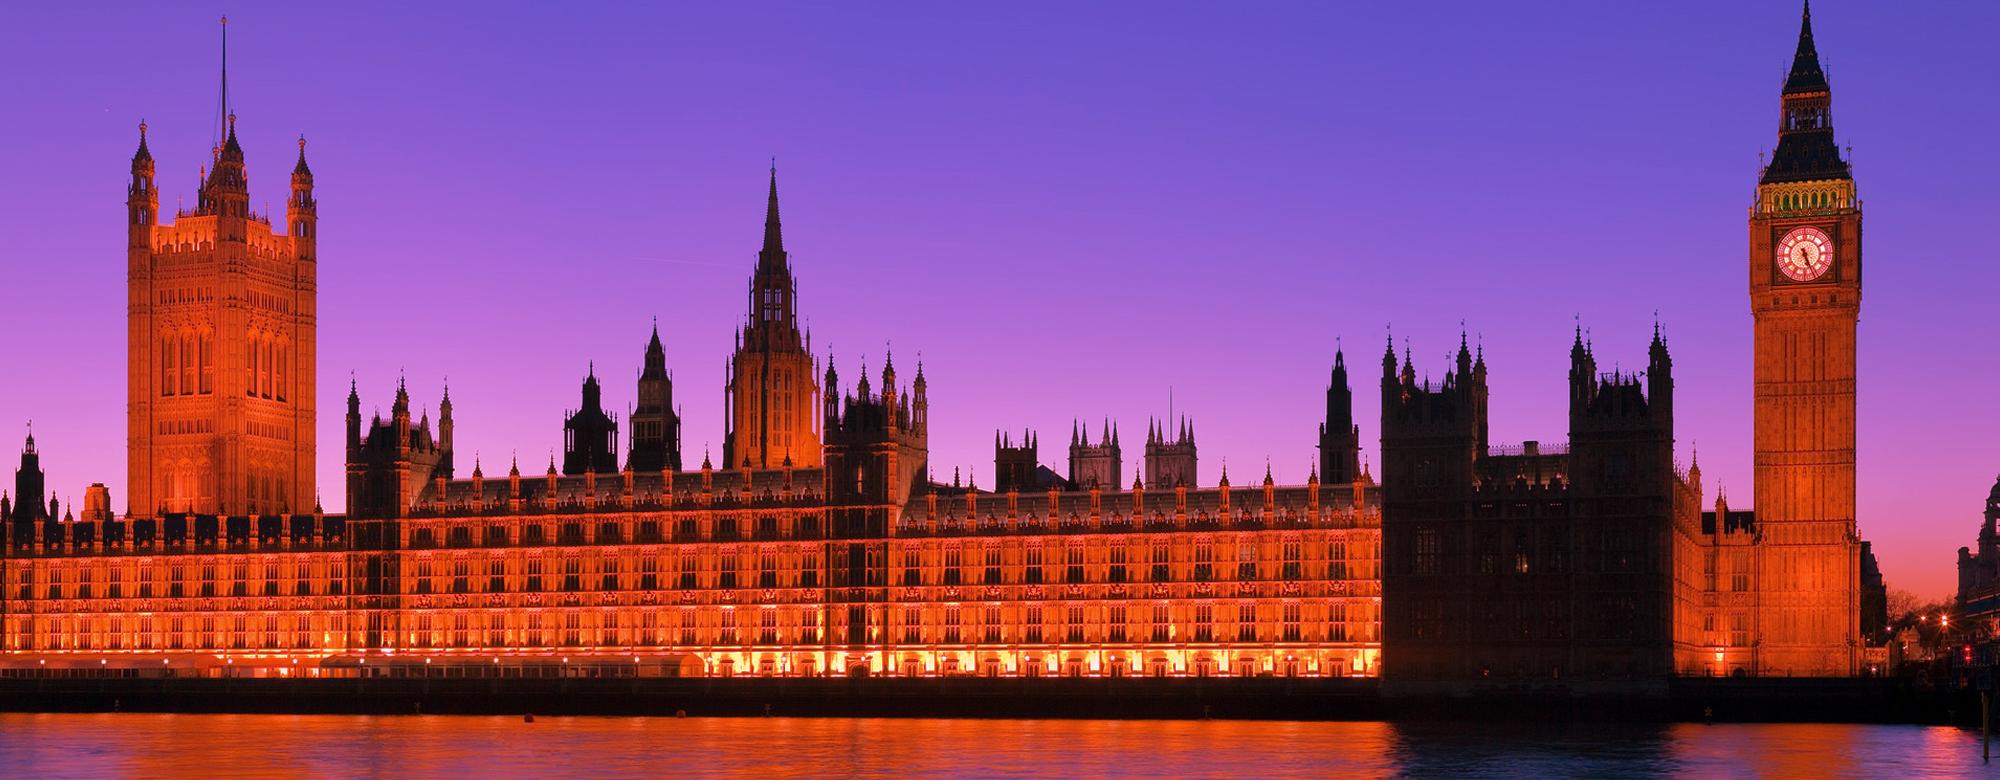 Houses of Parliament and Big Ben at Dusk